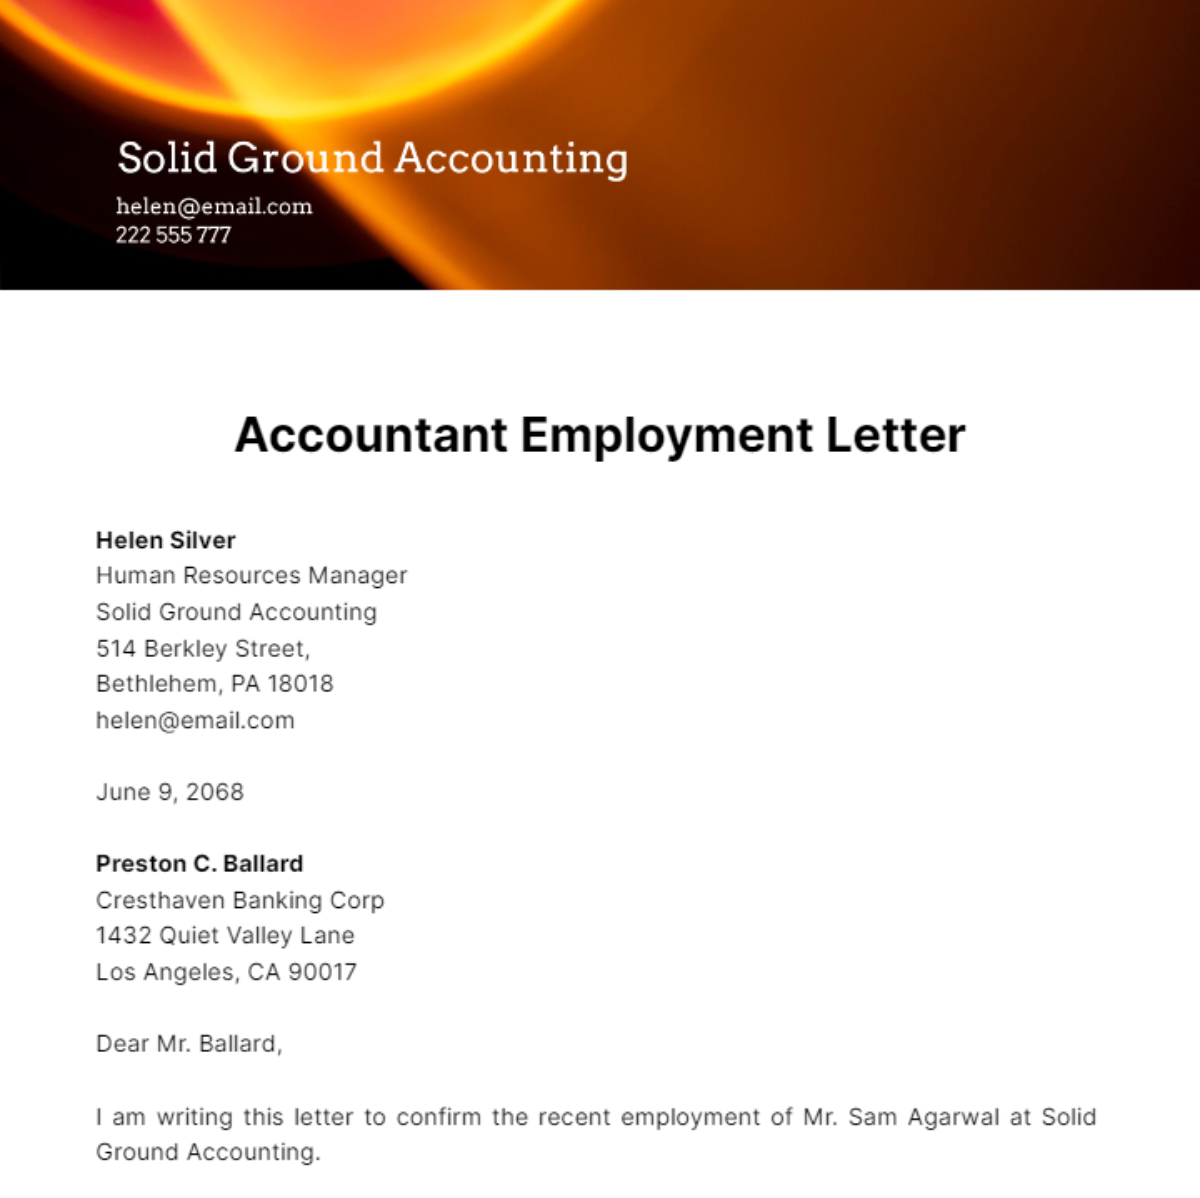 Accountant Employment Letter Template